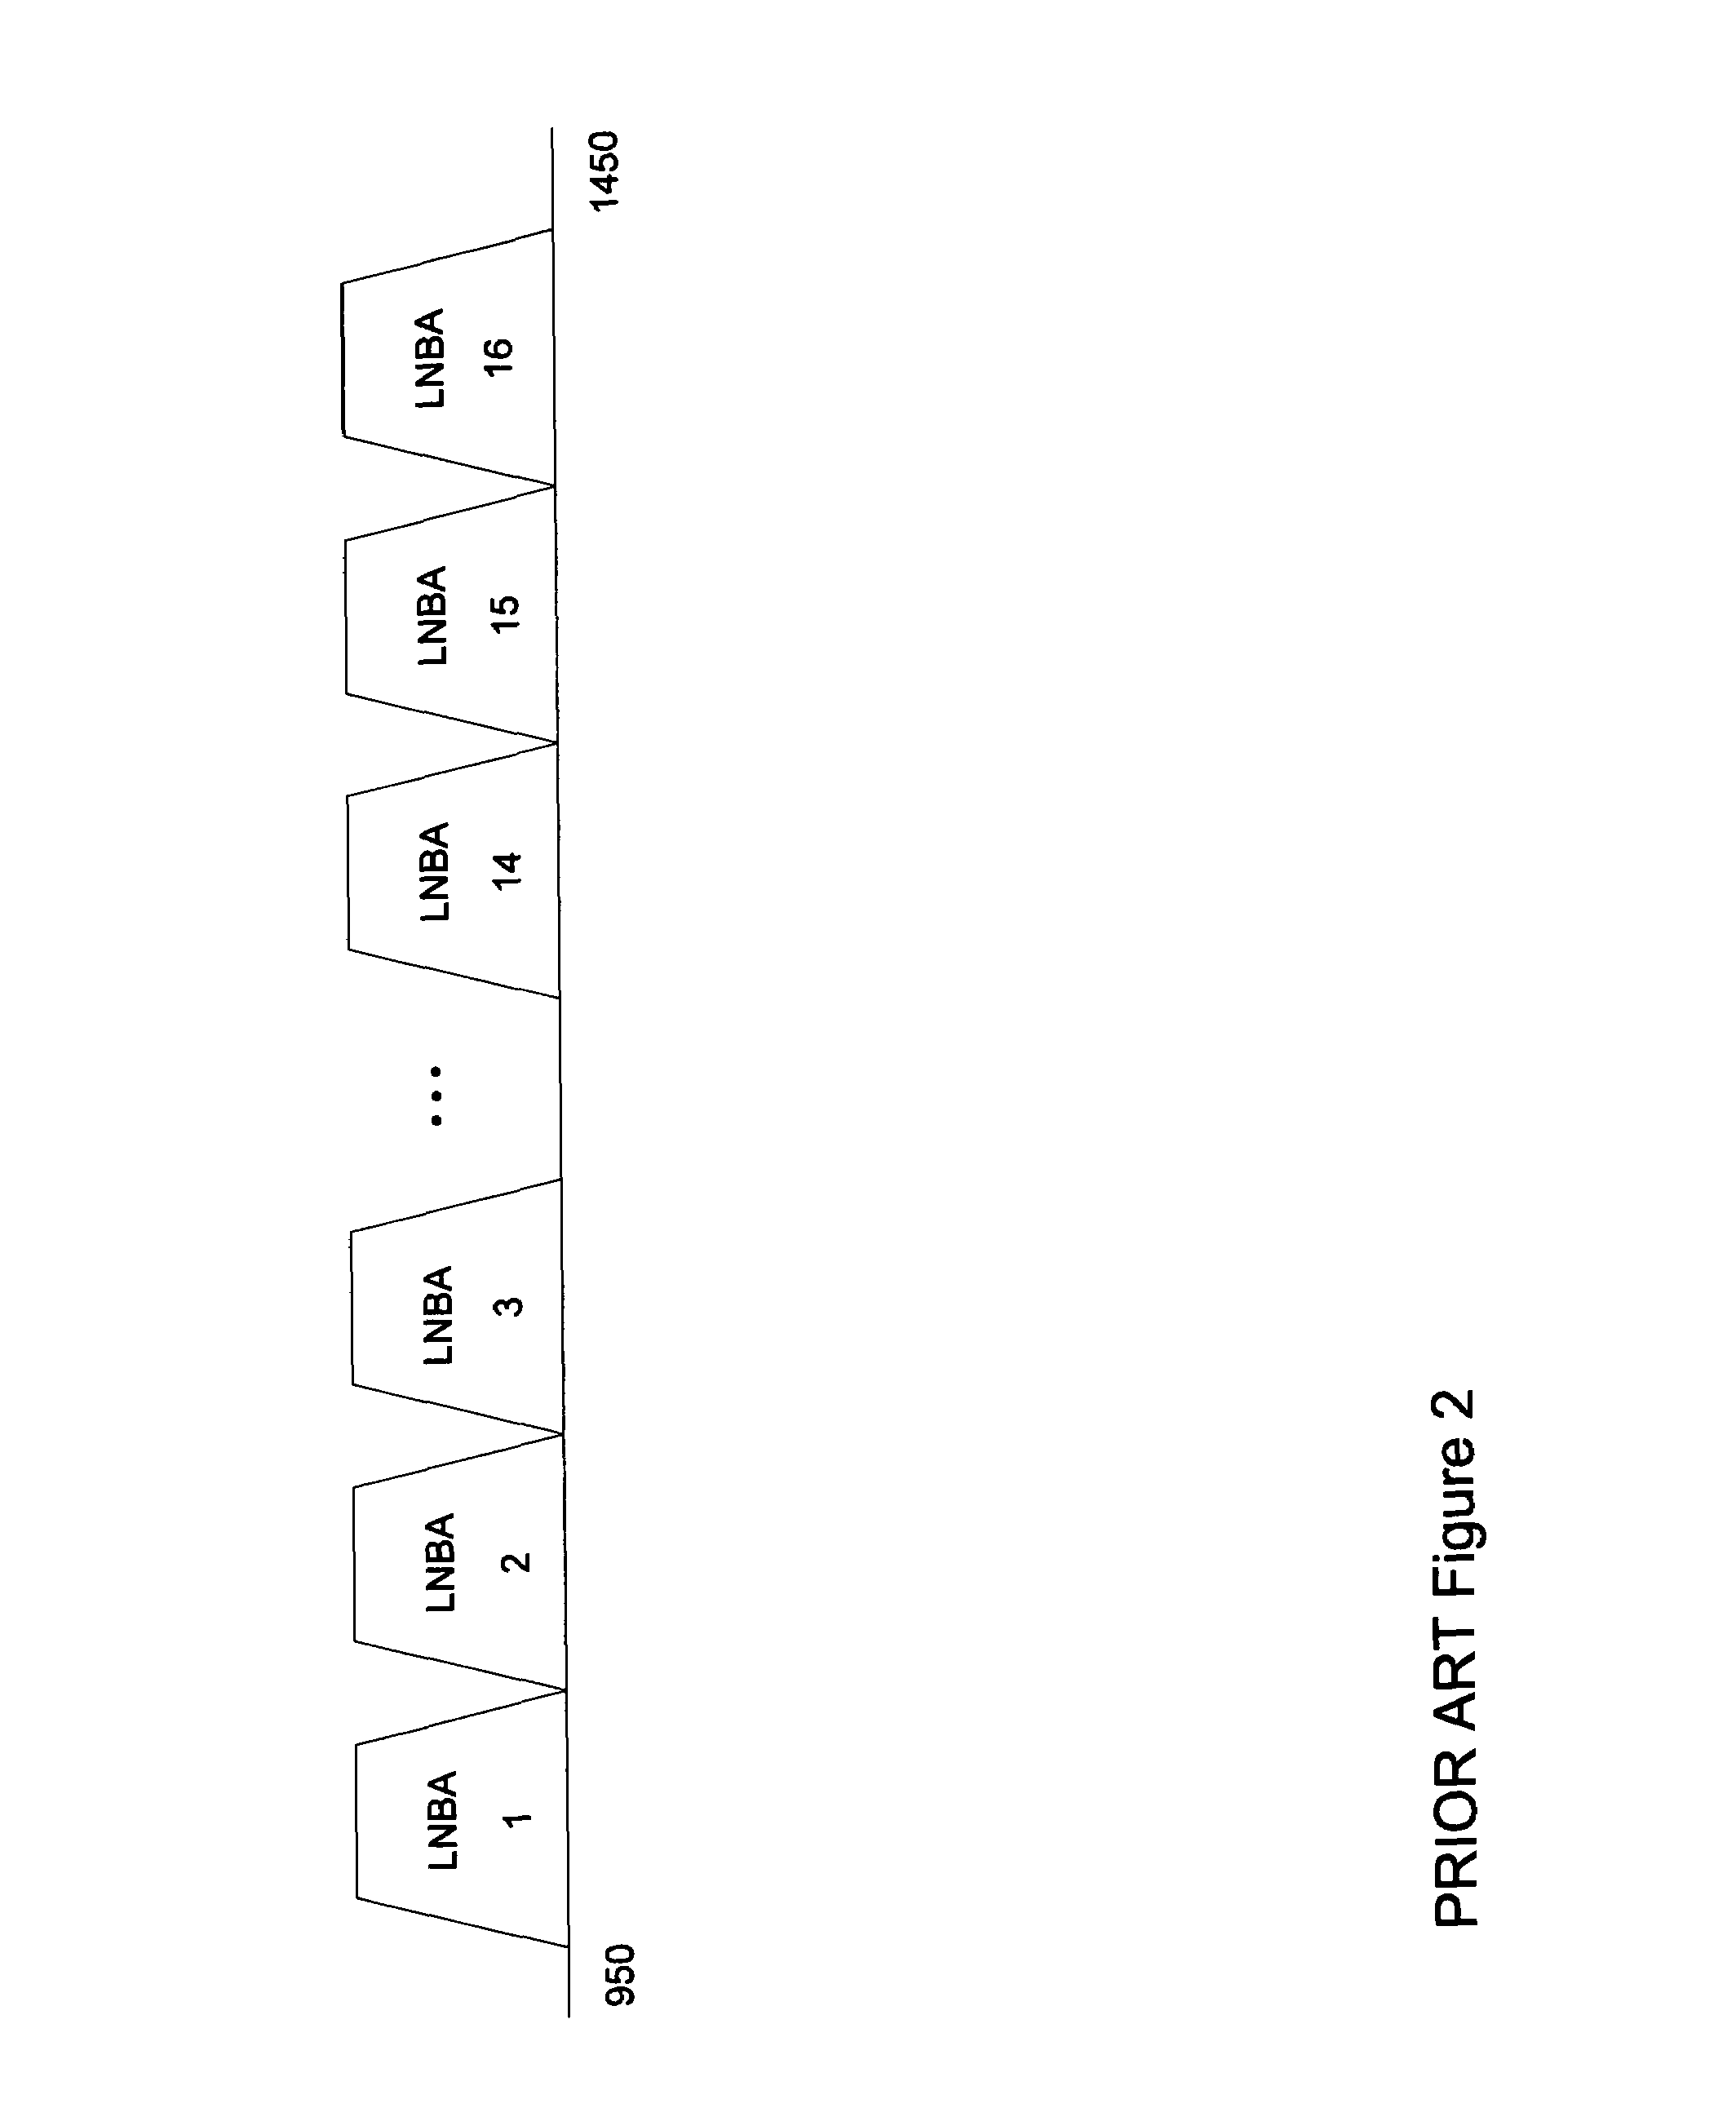 Signal selector and combiner system for broadband content distribution